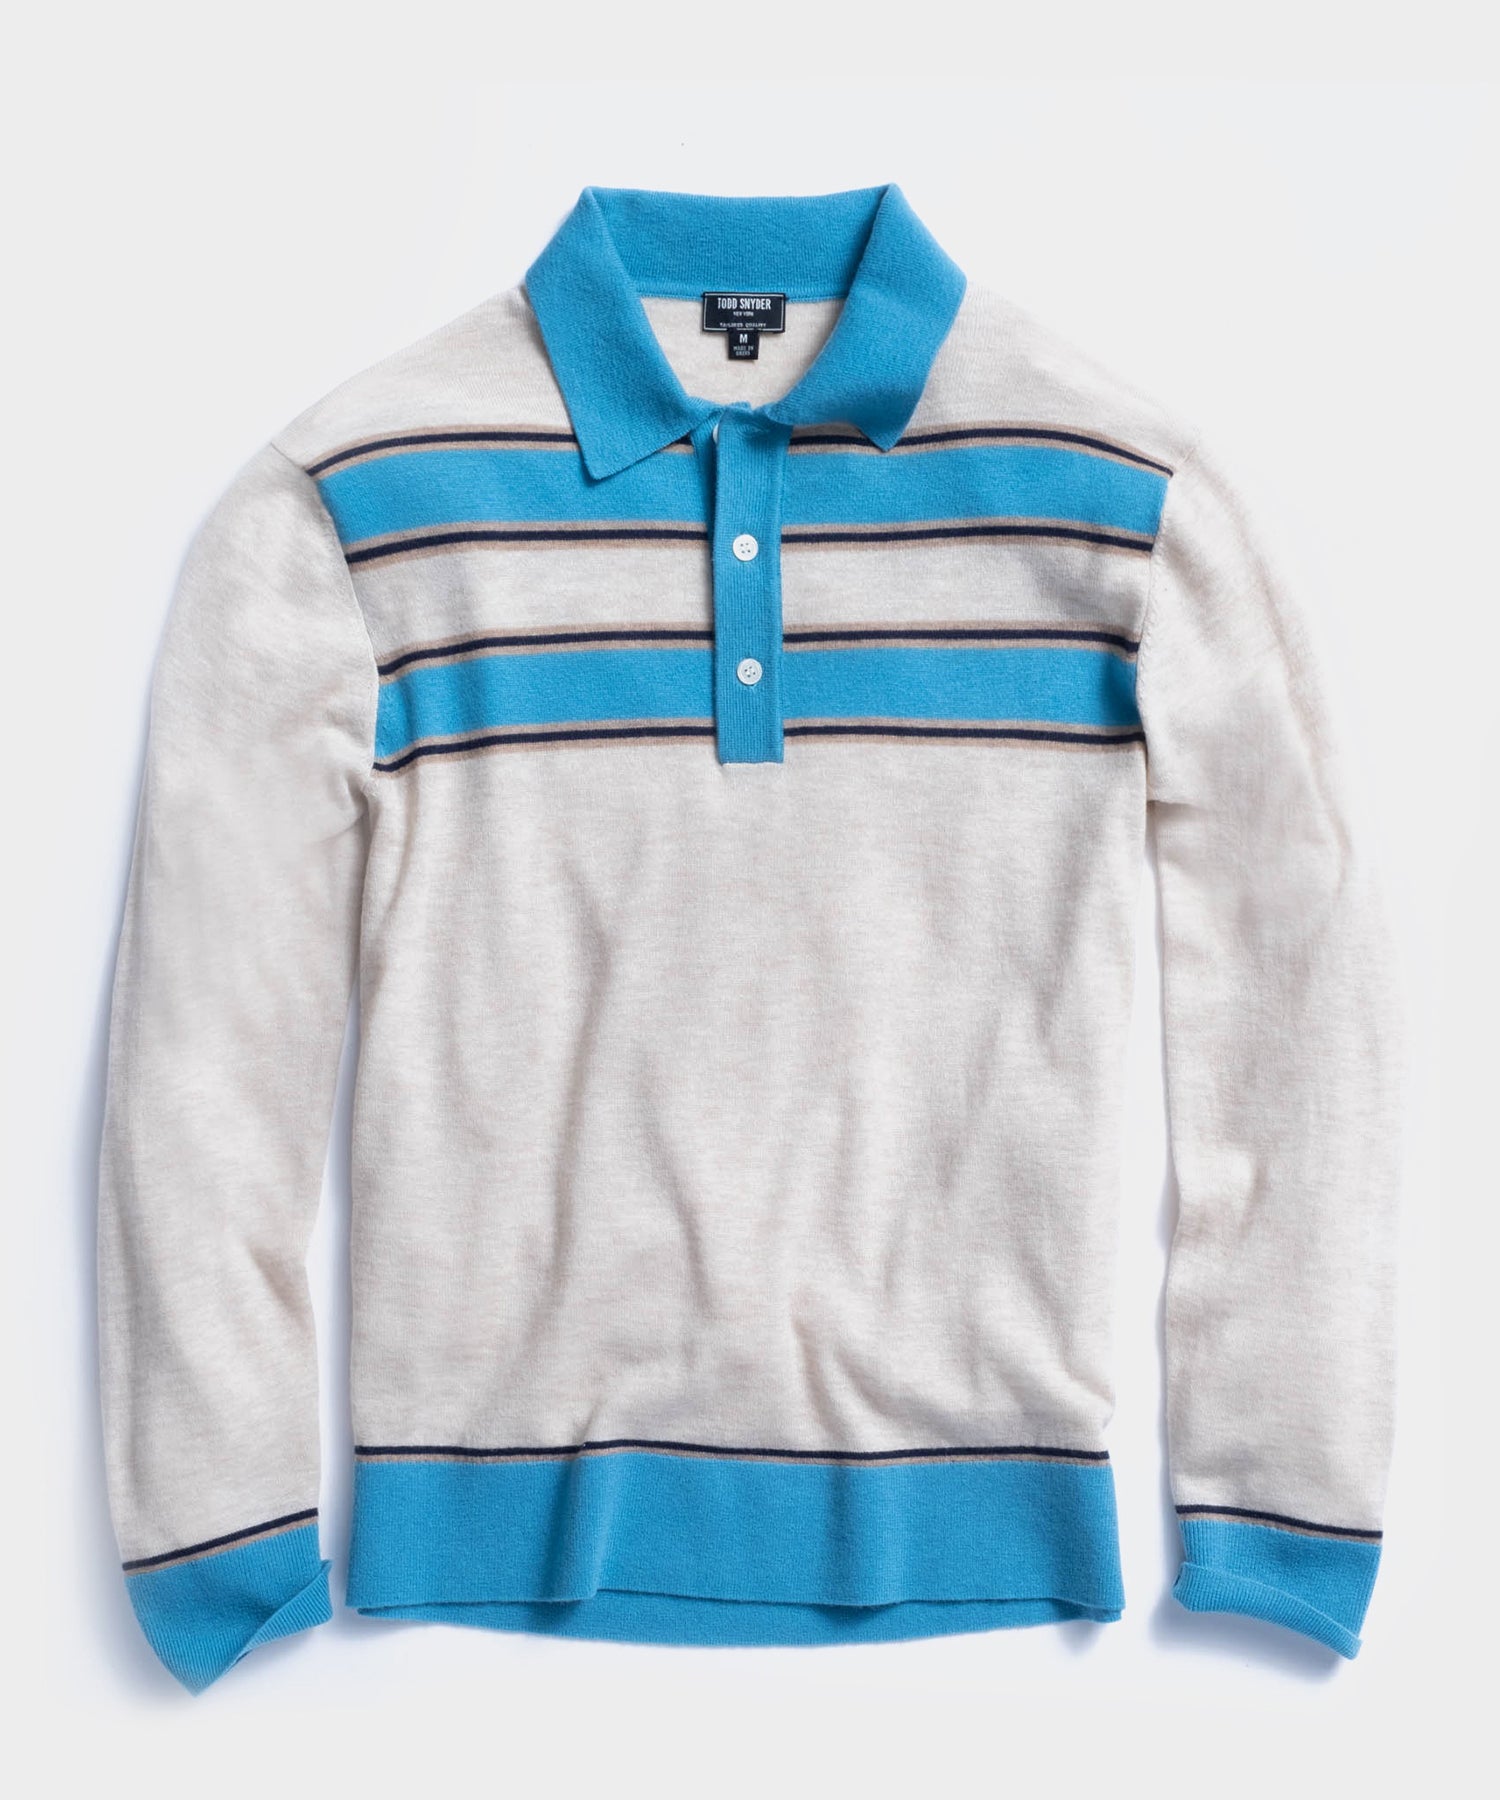 Image of Long Sleeve Stripe Sweater Polo in Cream